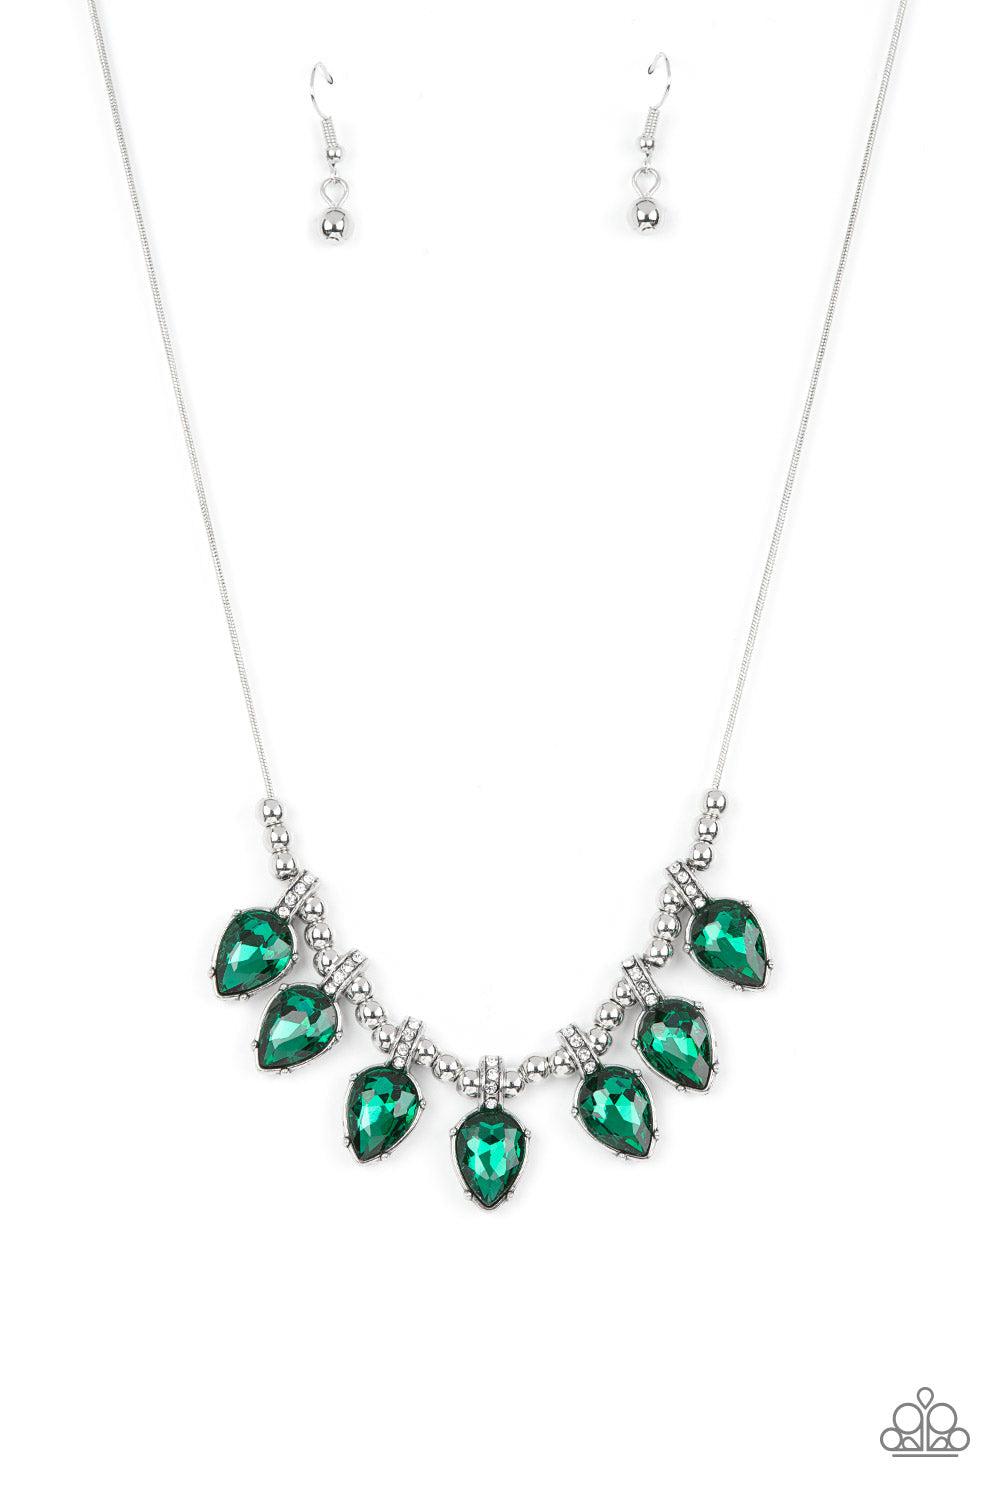 Crown Jewel Couture Green Rhinestone Necklace - Paparazzi Accessories- lightbox - CarasShop.com - $5 Jewelry by Cara Jewels